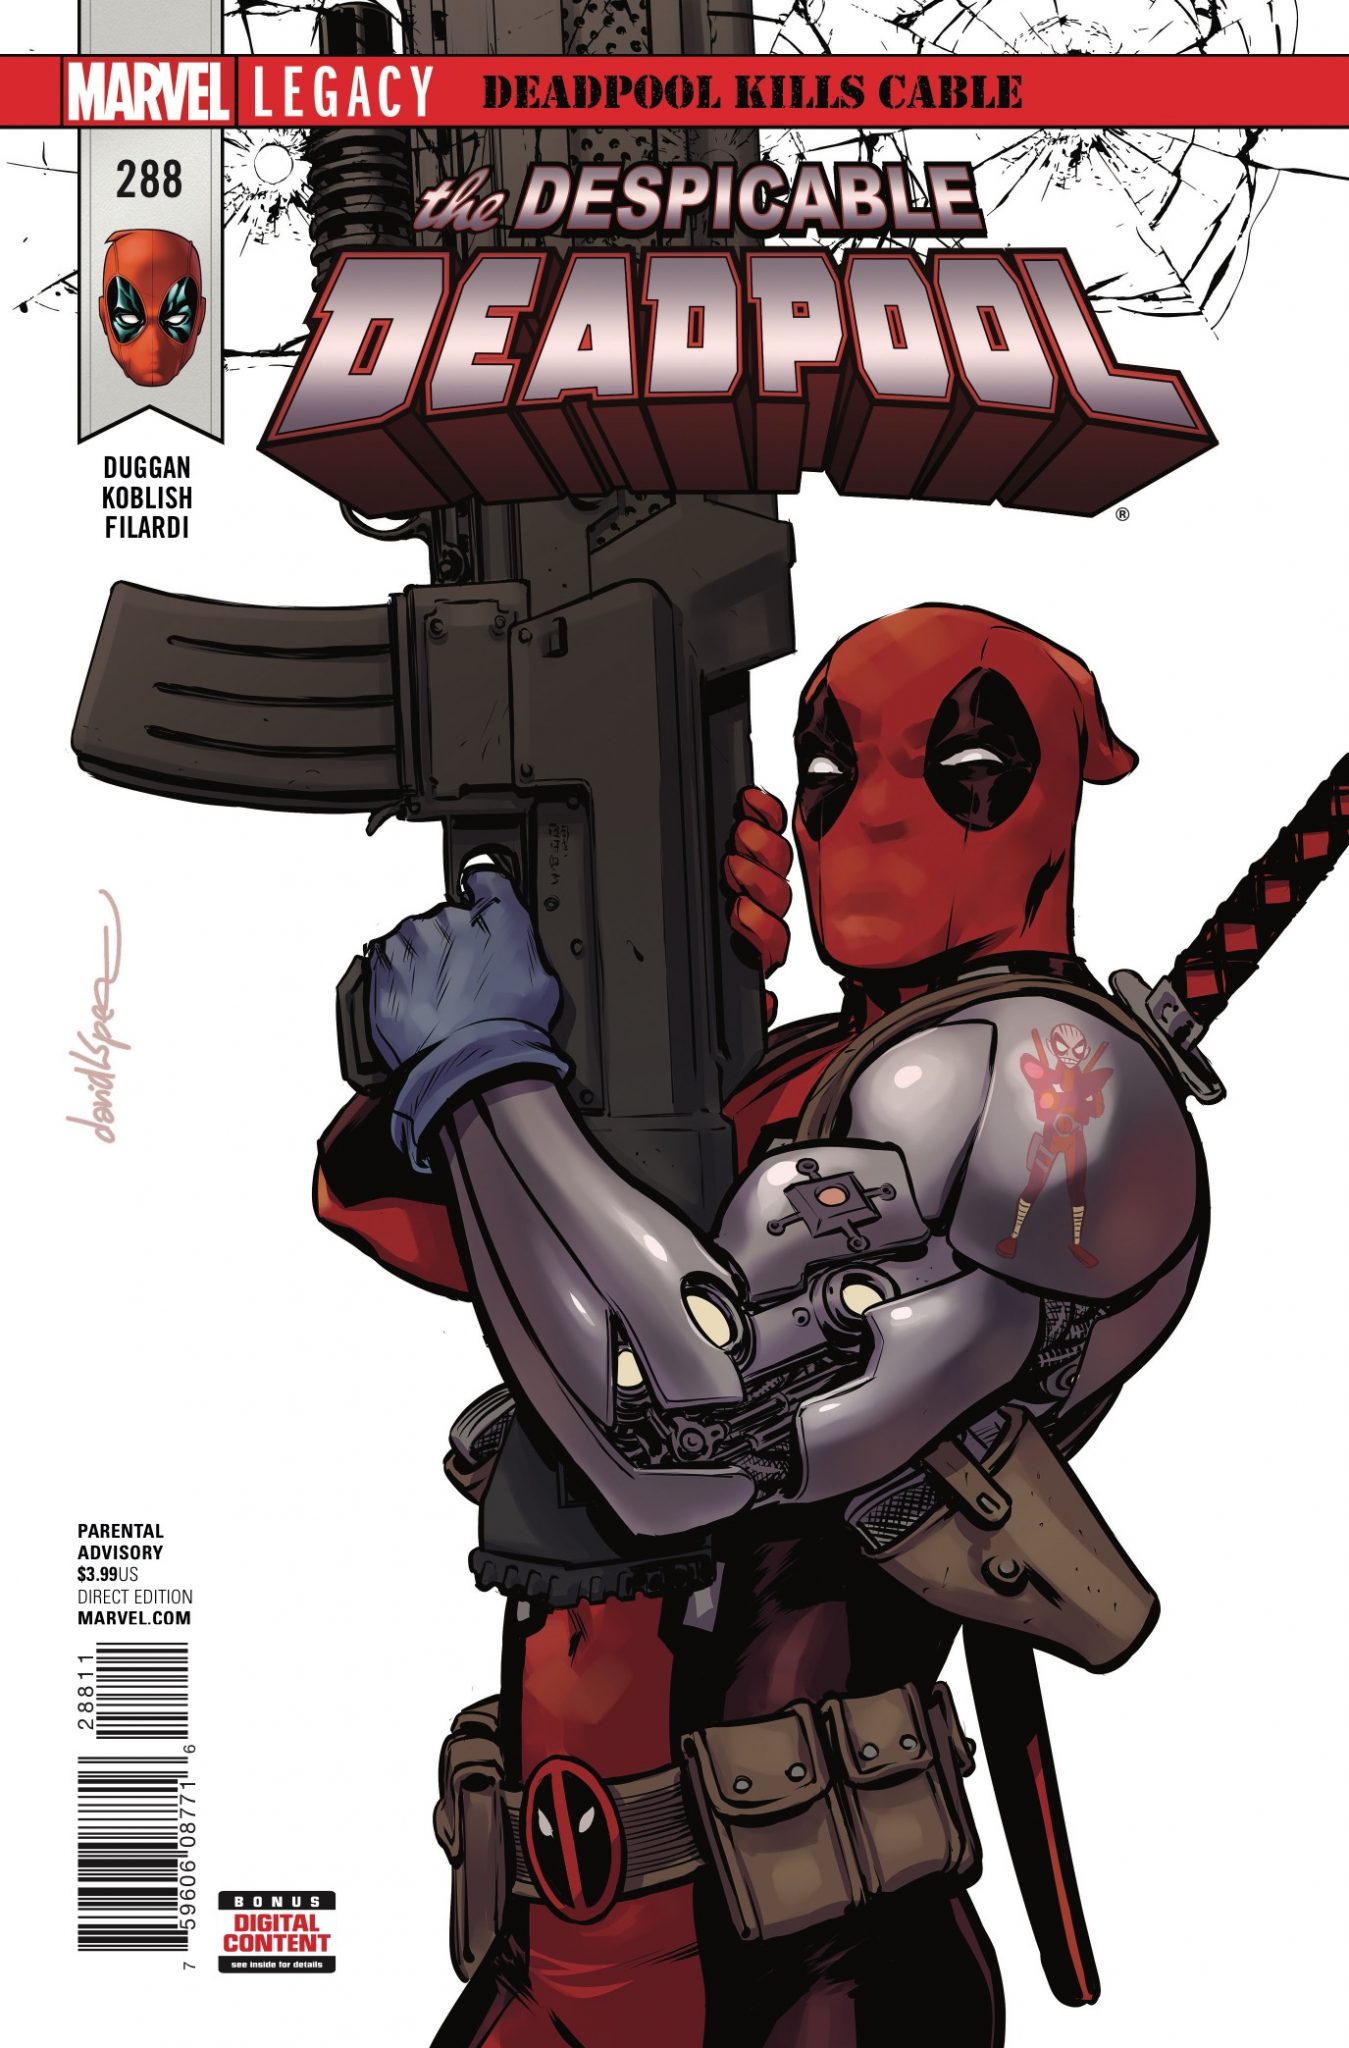 Marvel Preview: The Despicable Deadpool #288